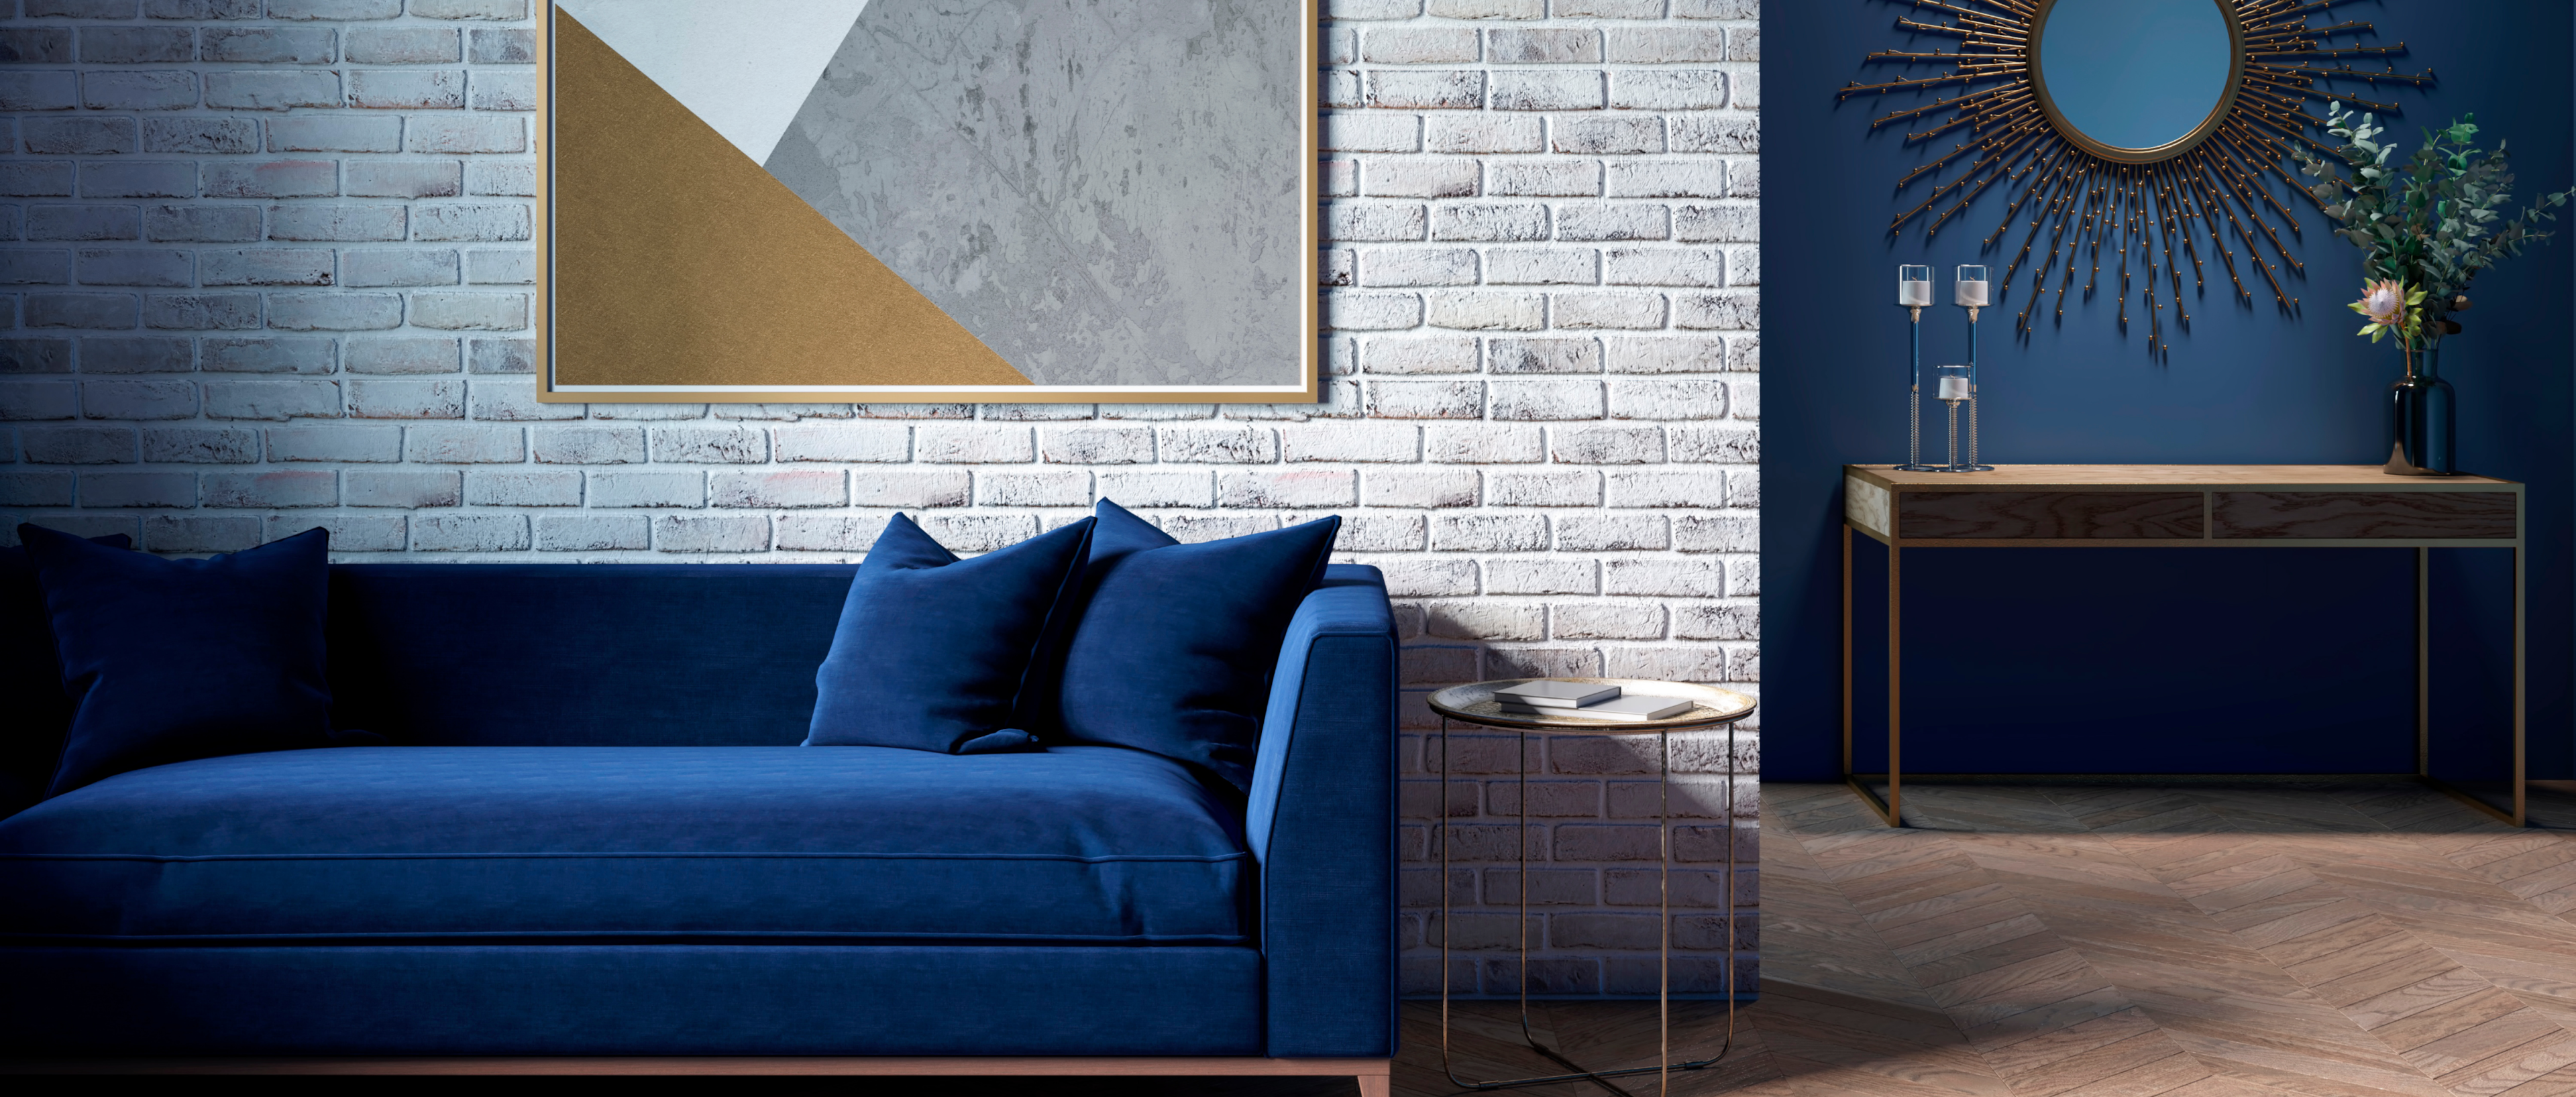 A modern living room with a dark blue sofa next to a brick wall and a poster.